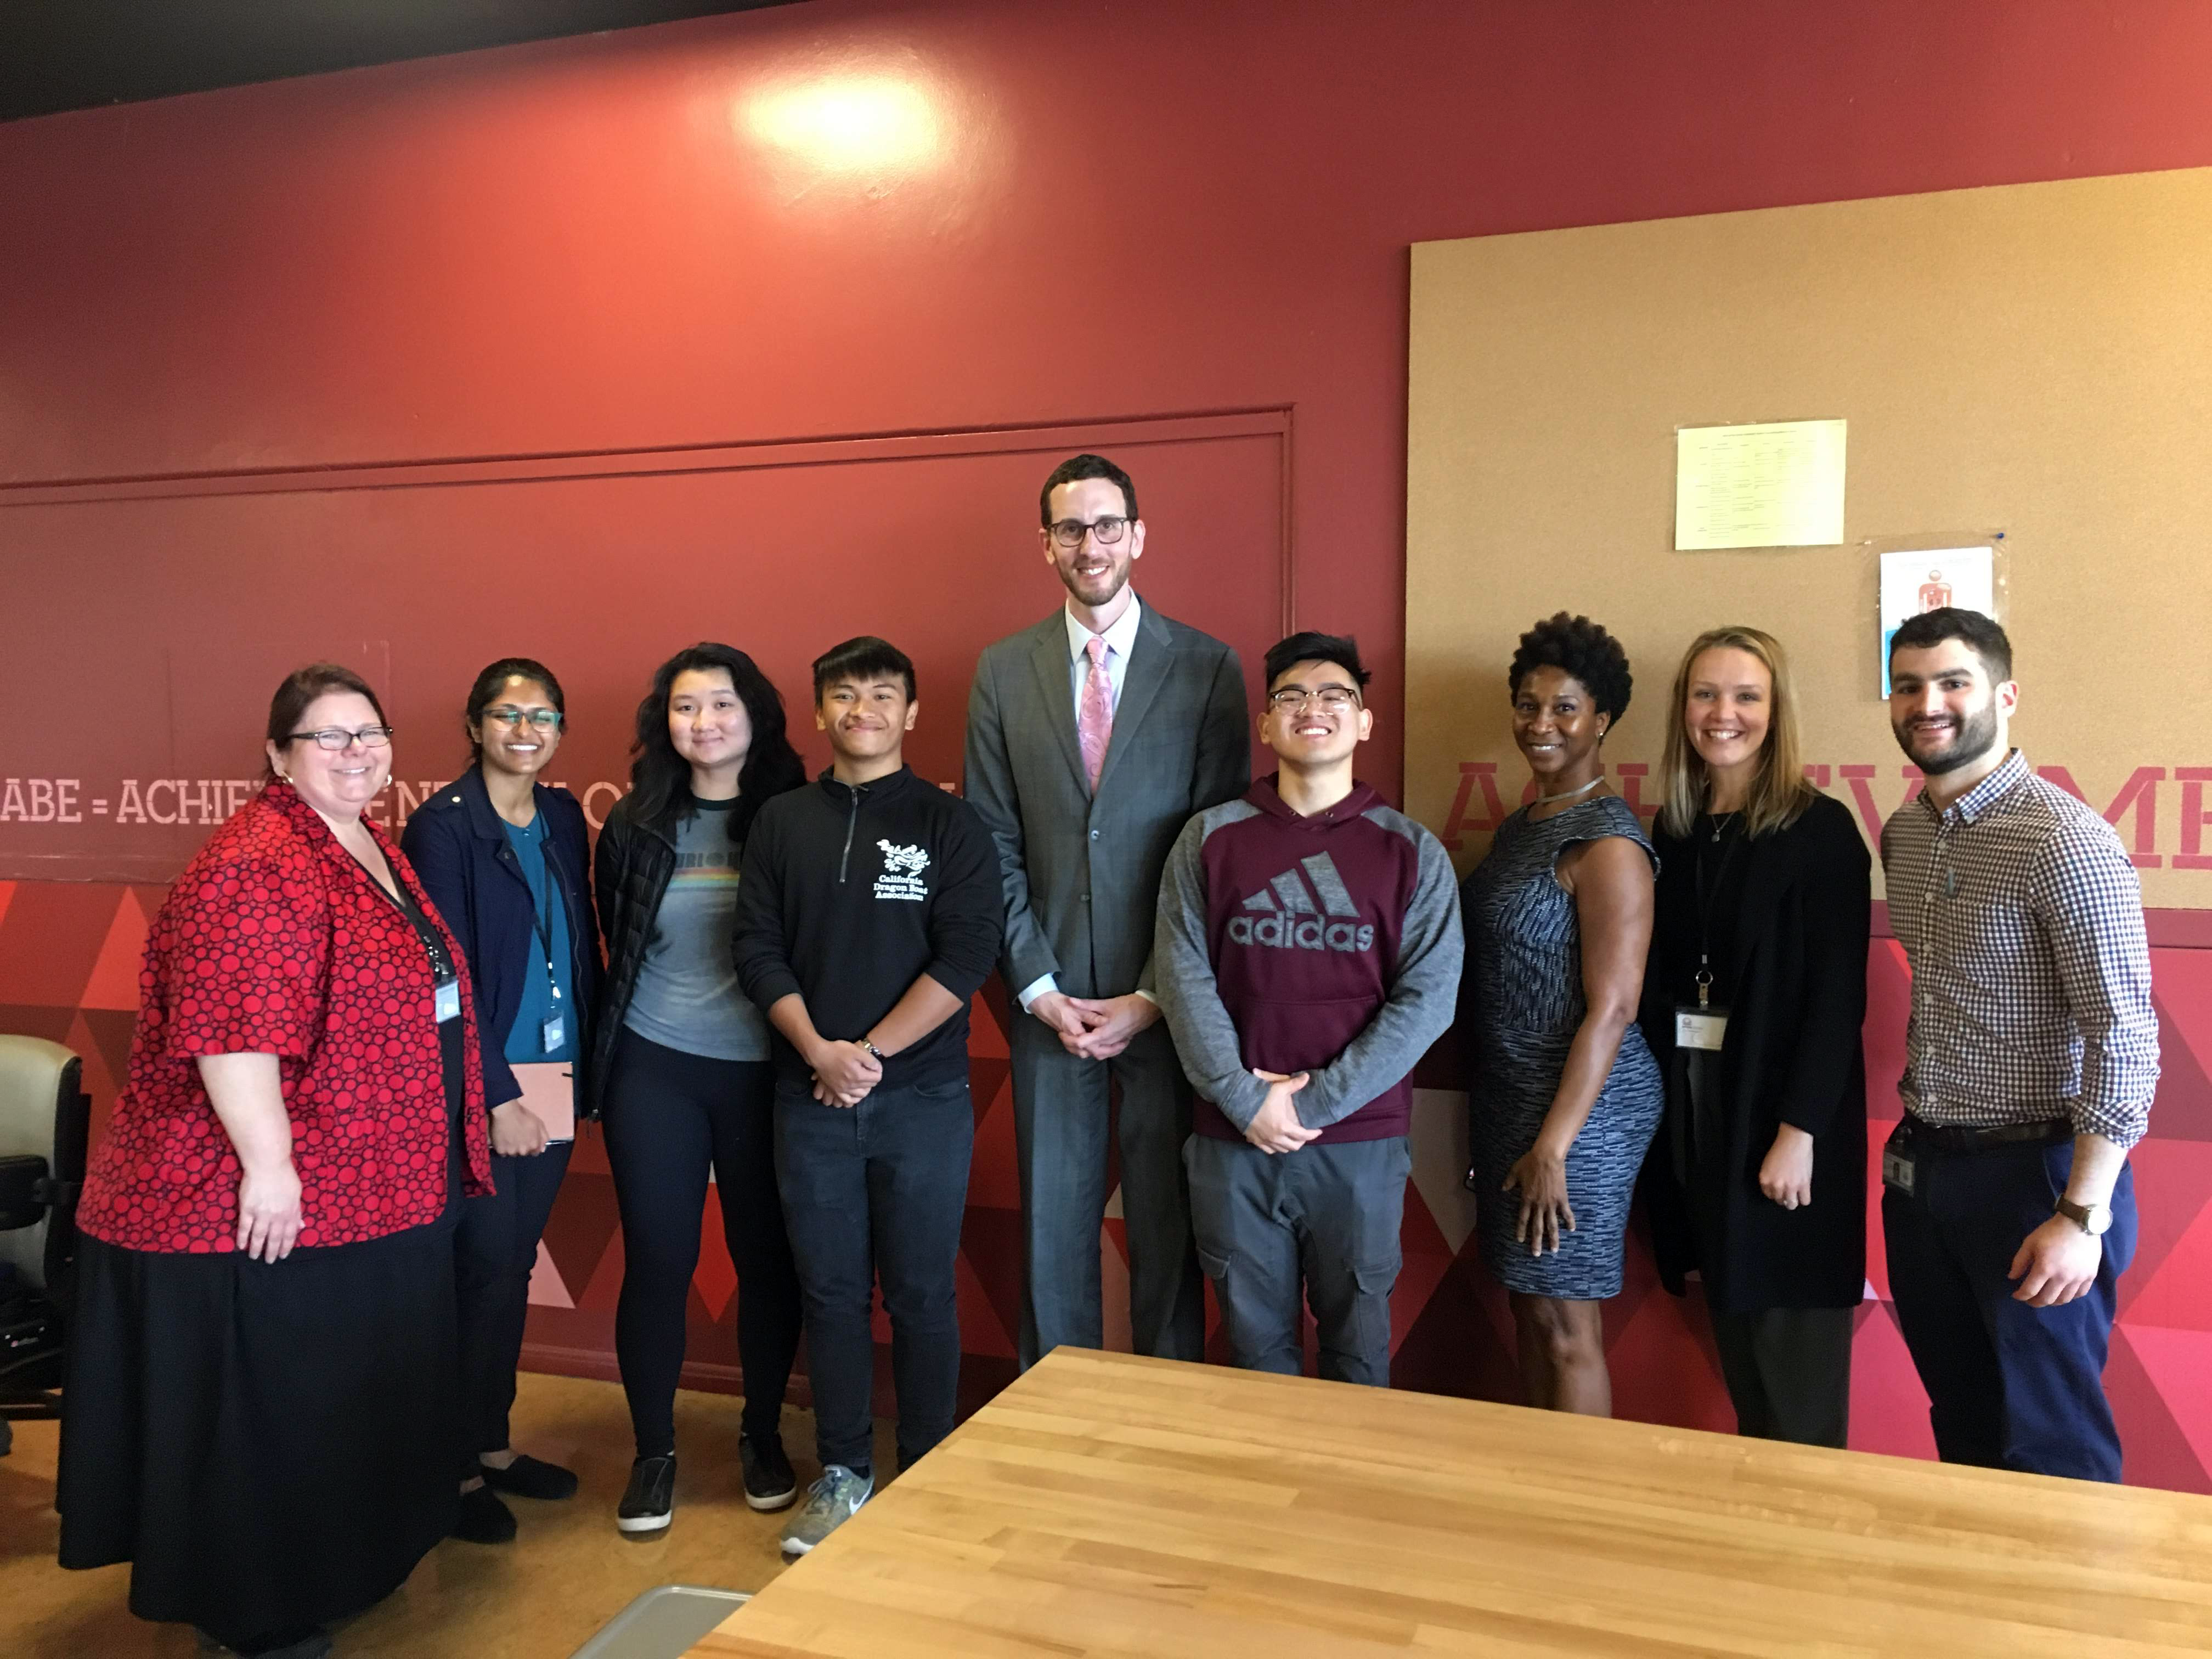 California State Senator Scott Wiener, center, joins Lincoln High School students for lunch, along with Student Nutrition Services staff and Executive Director Jennifer LeBarre, left